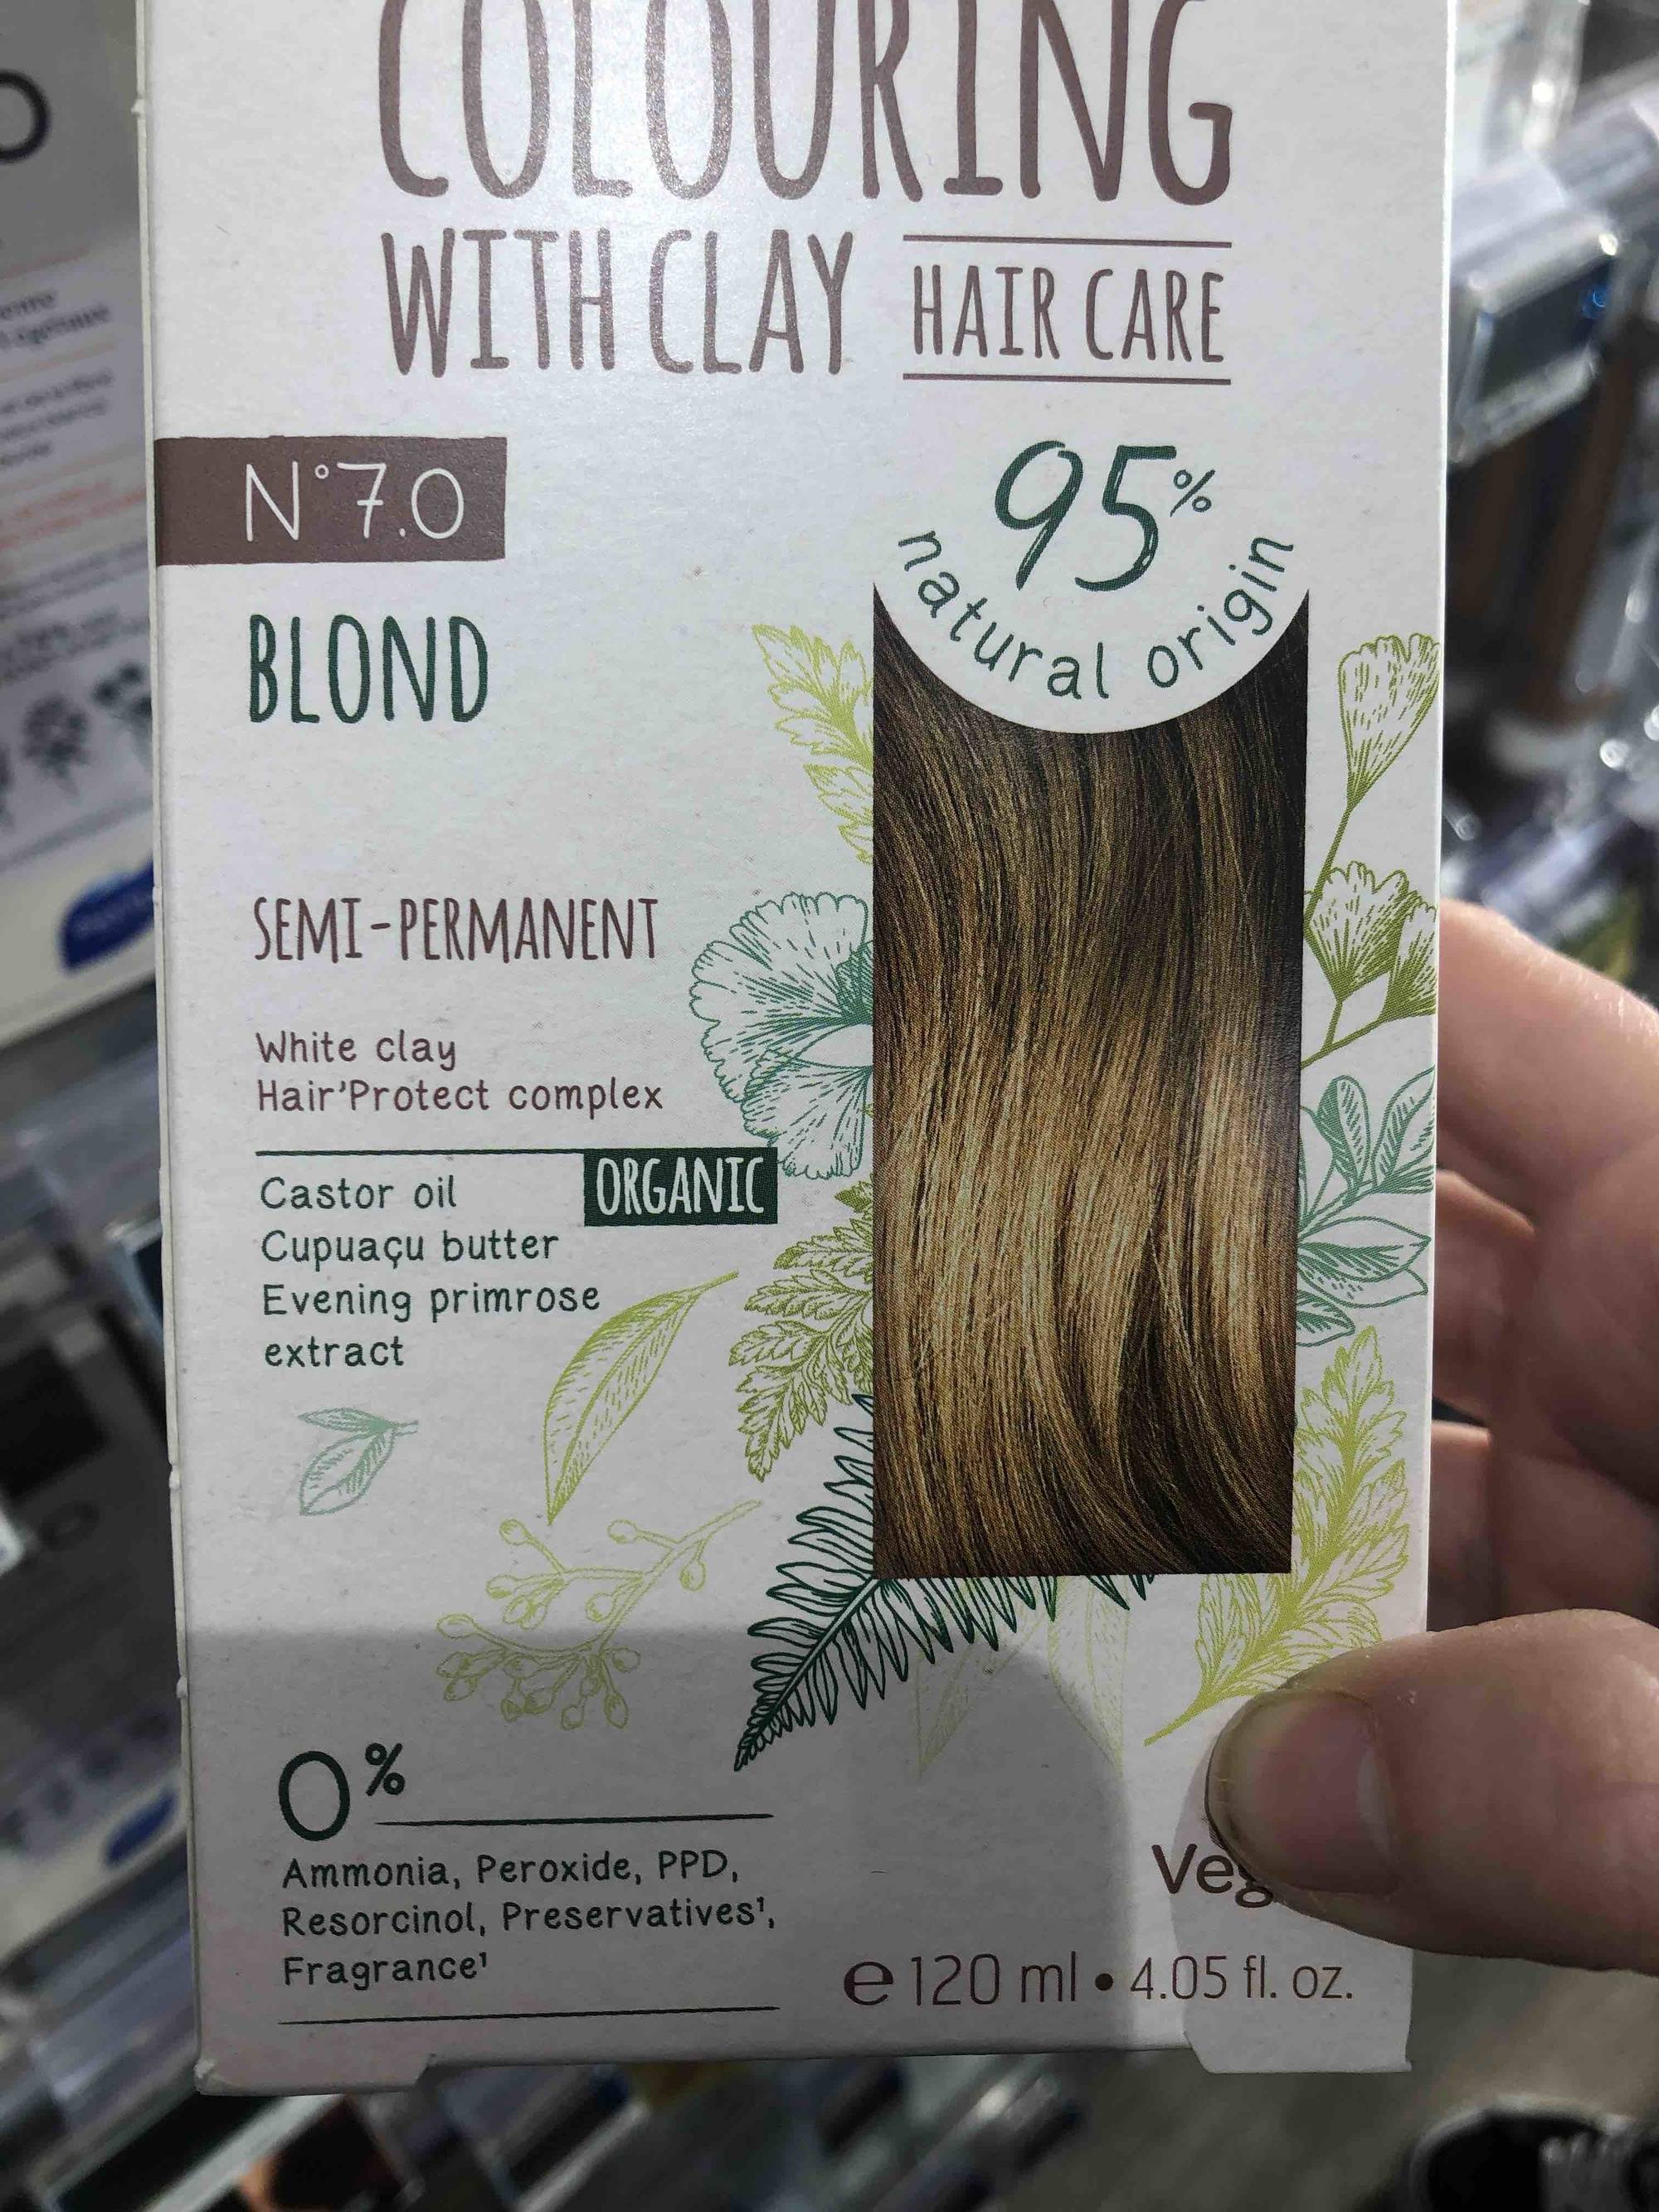 CATTIER - Colouring with clay semi-permanent N° 7.0 blond